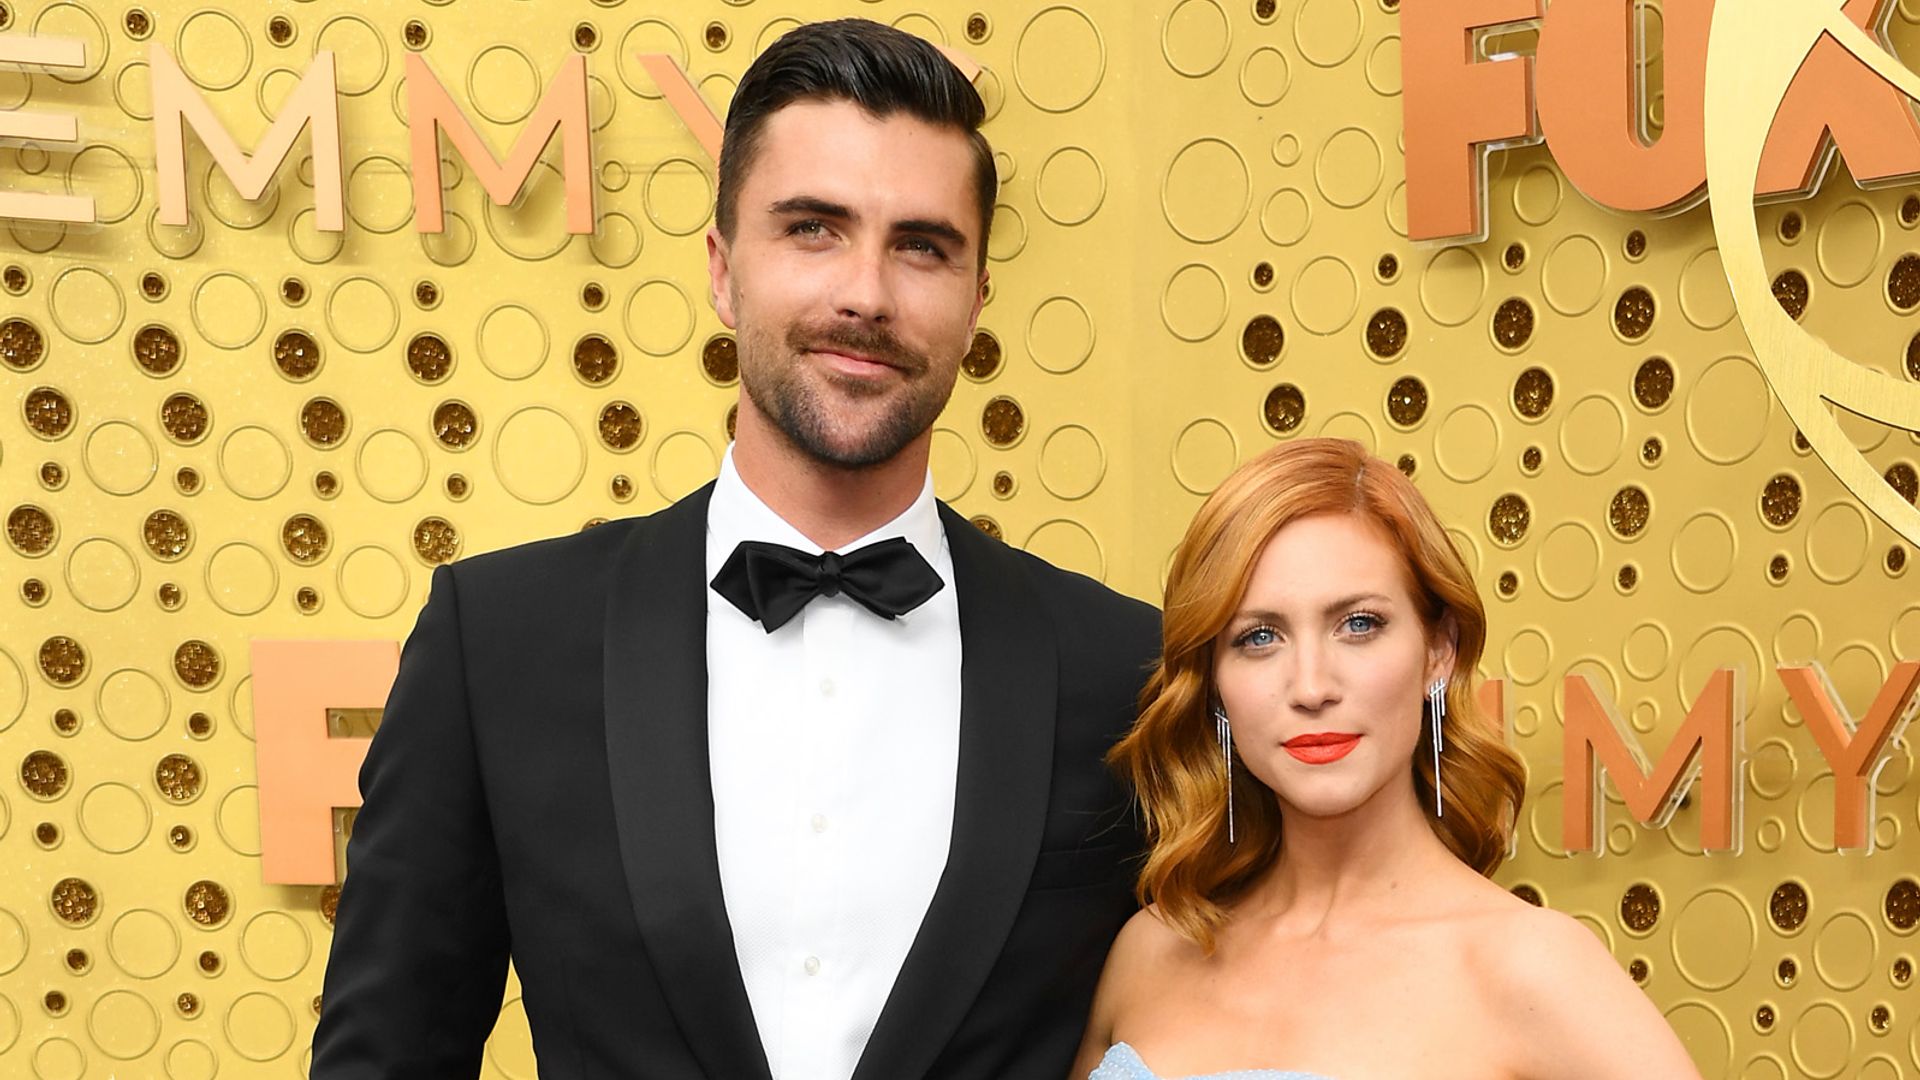 Tyler Stanaland and Brittany Snow attend the 71st Emmy Awards at Microsoft Theater on September 22, 2019 in Los Angeles, California.